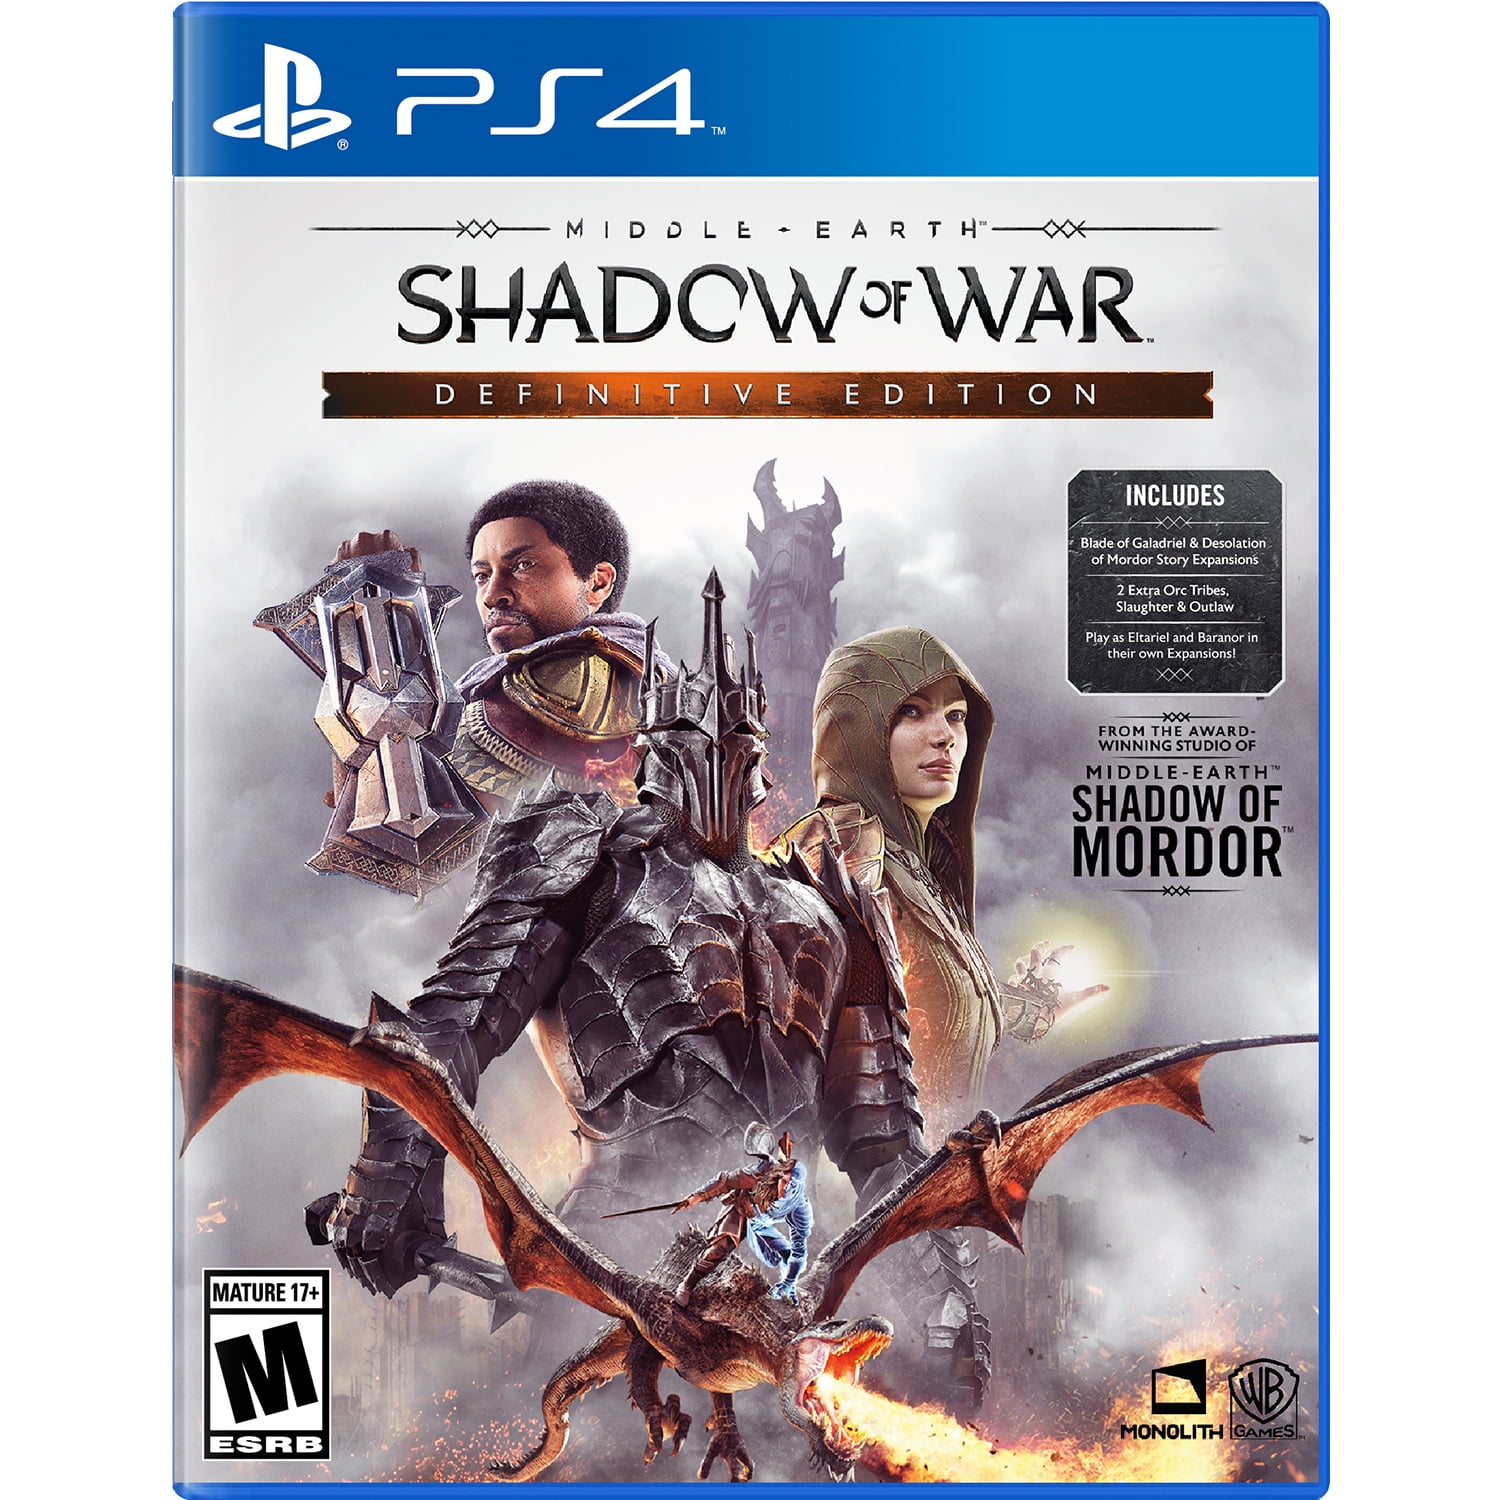 Middle-earth: Shadow of War Definitive Edition - PC - Buy it at Nuuvem